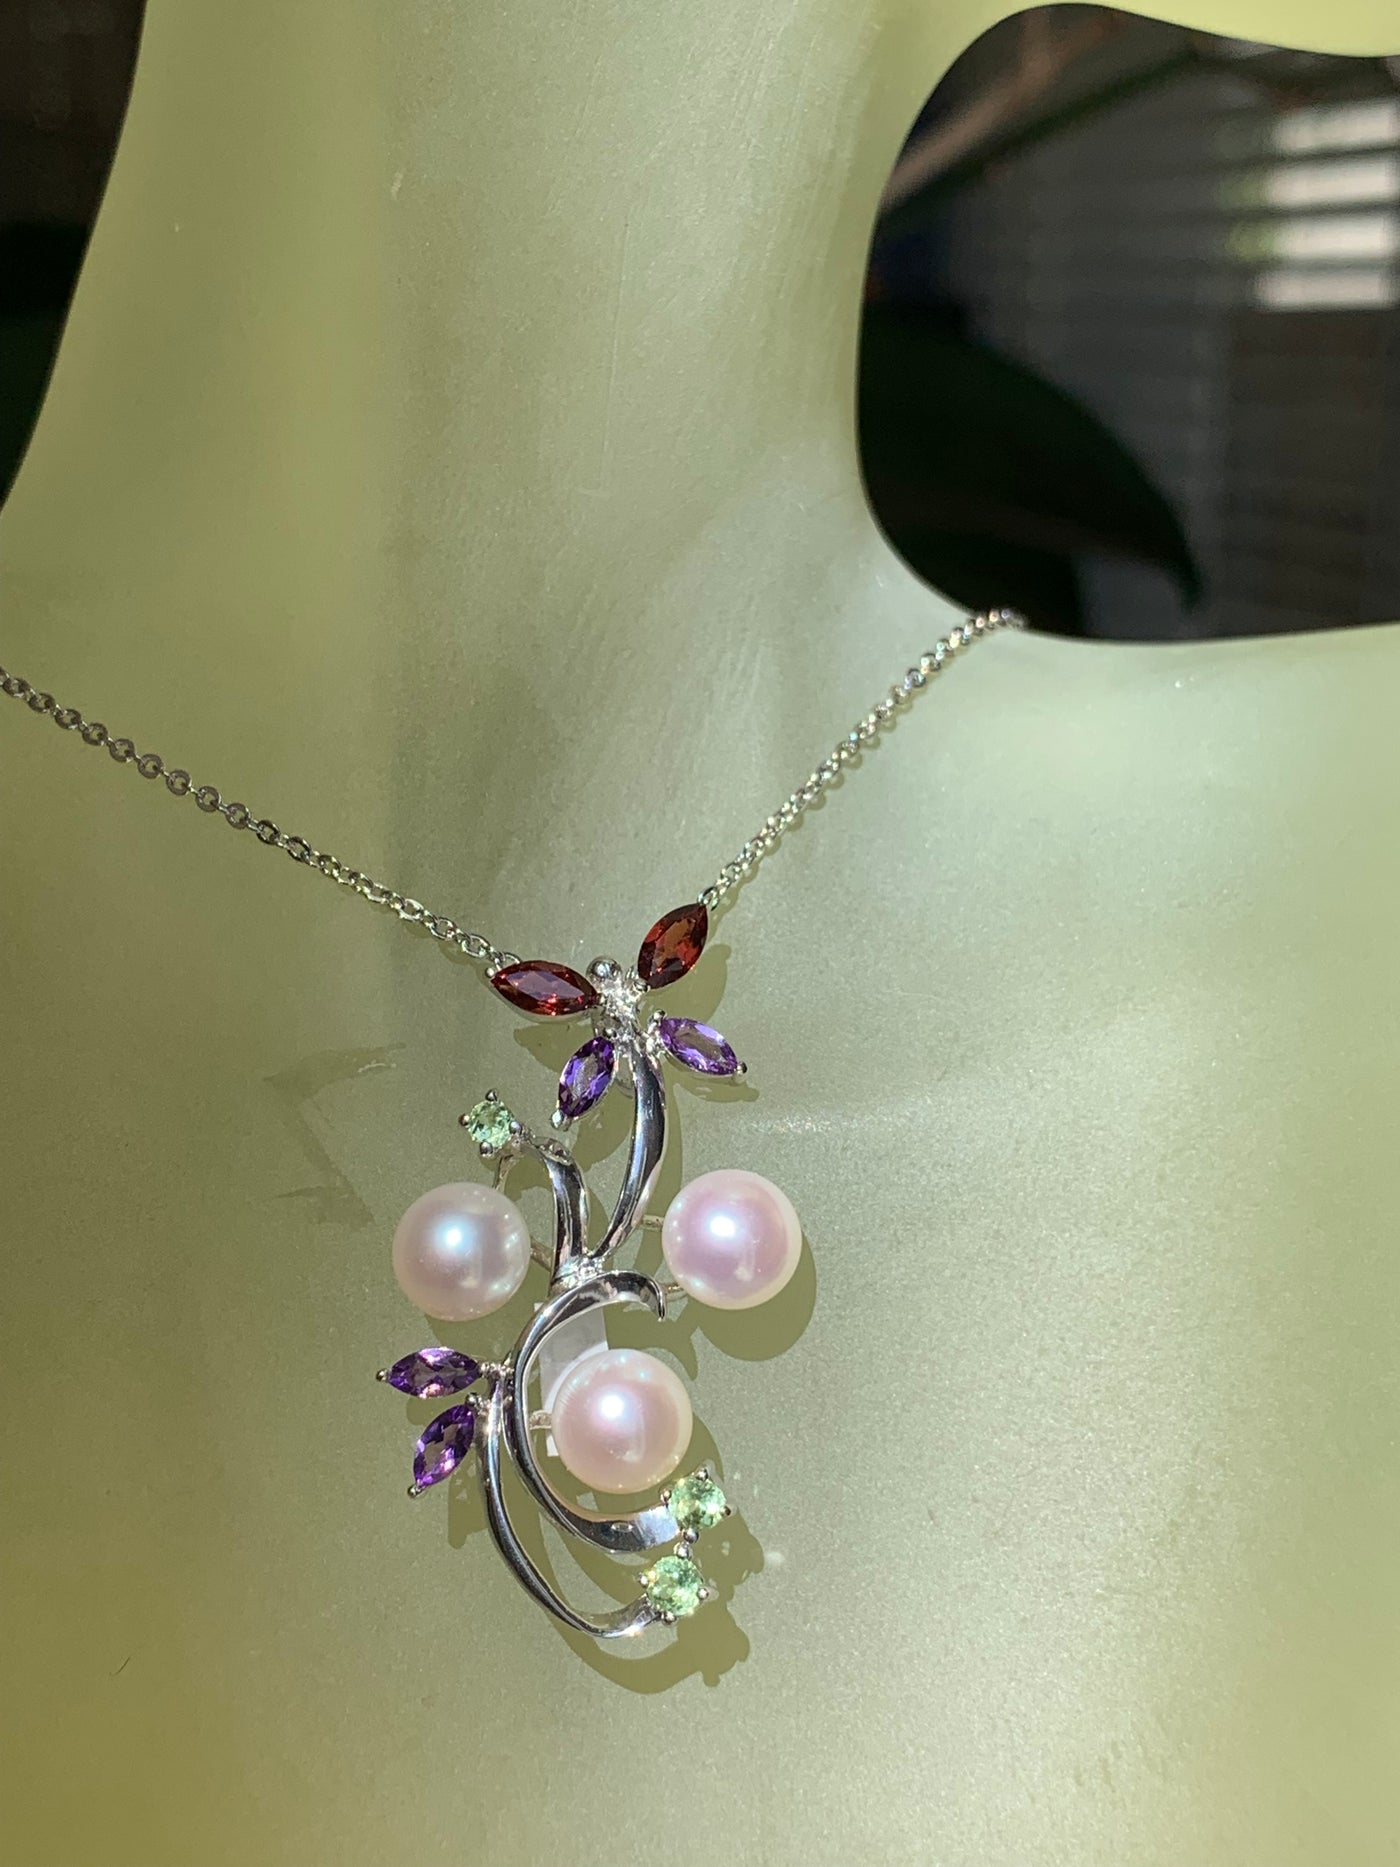 3 Round Genuine Pearl Pendant with Amethyst, Garnet & Peridot Gems Accent in Silver